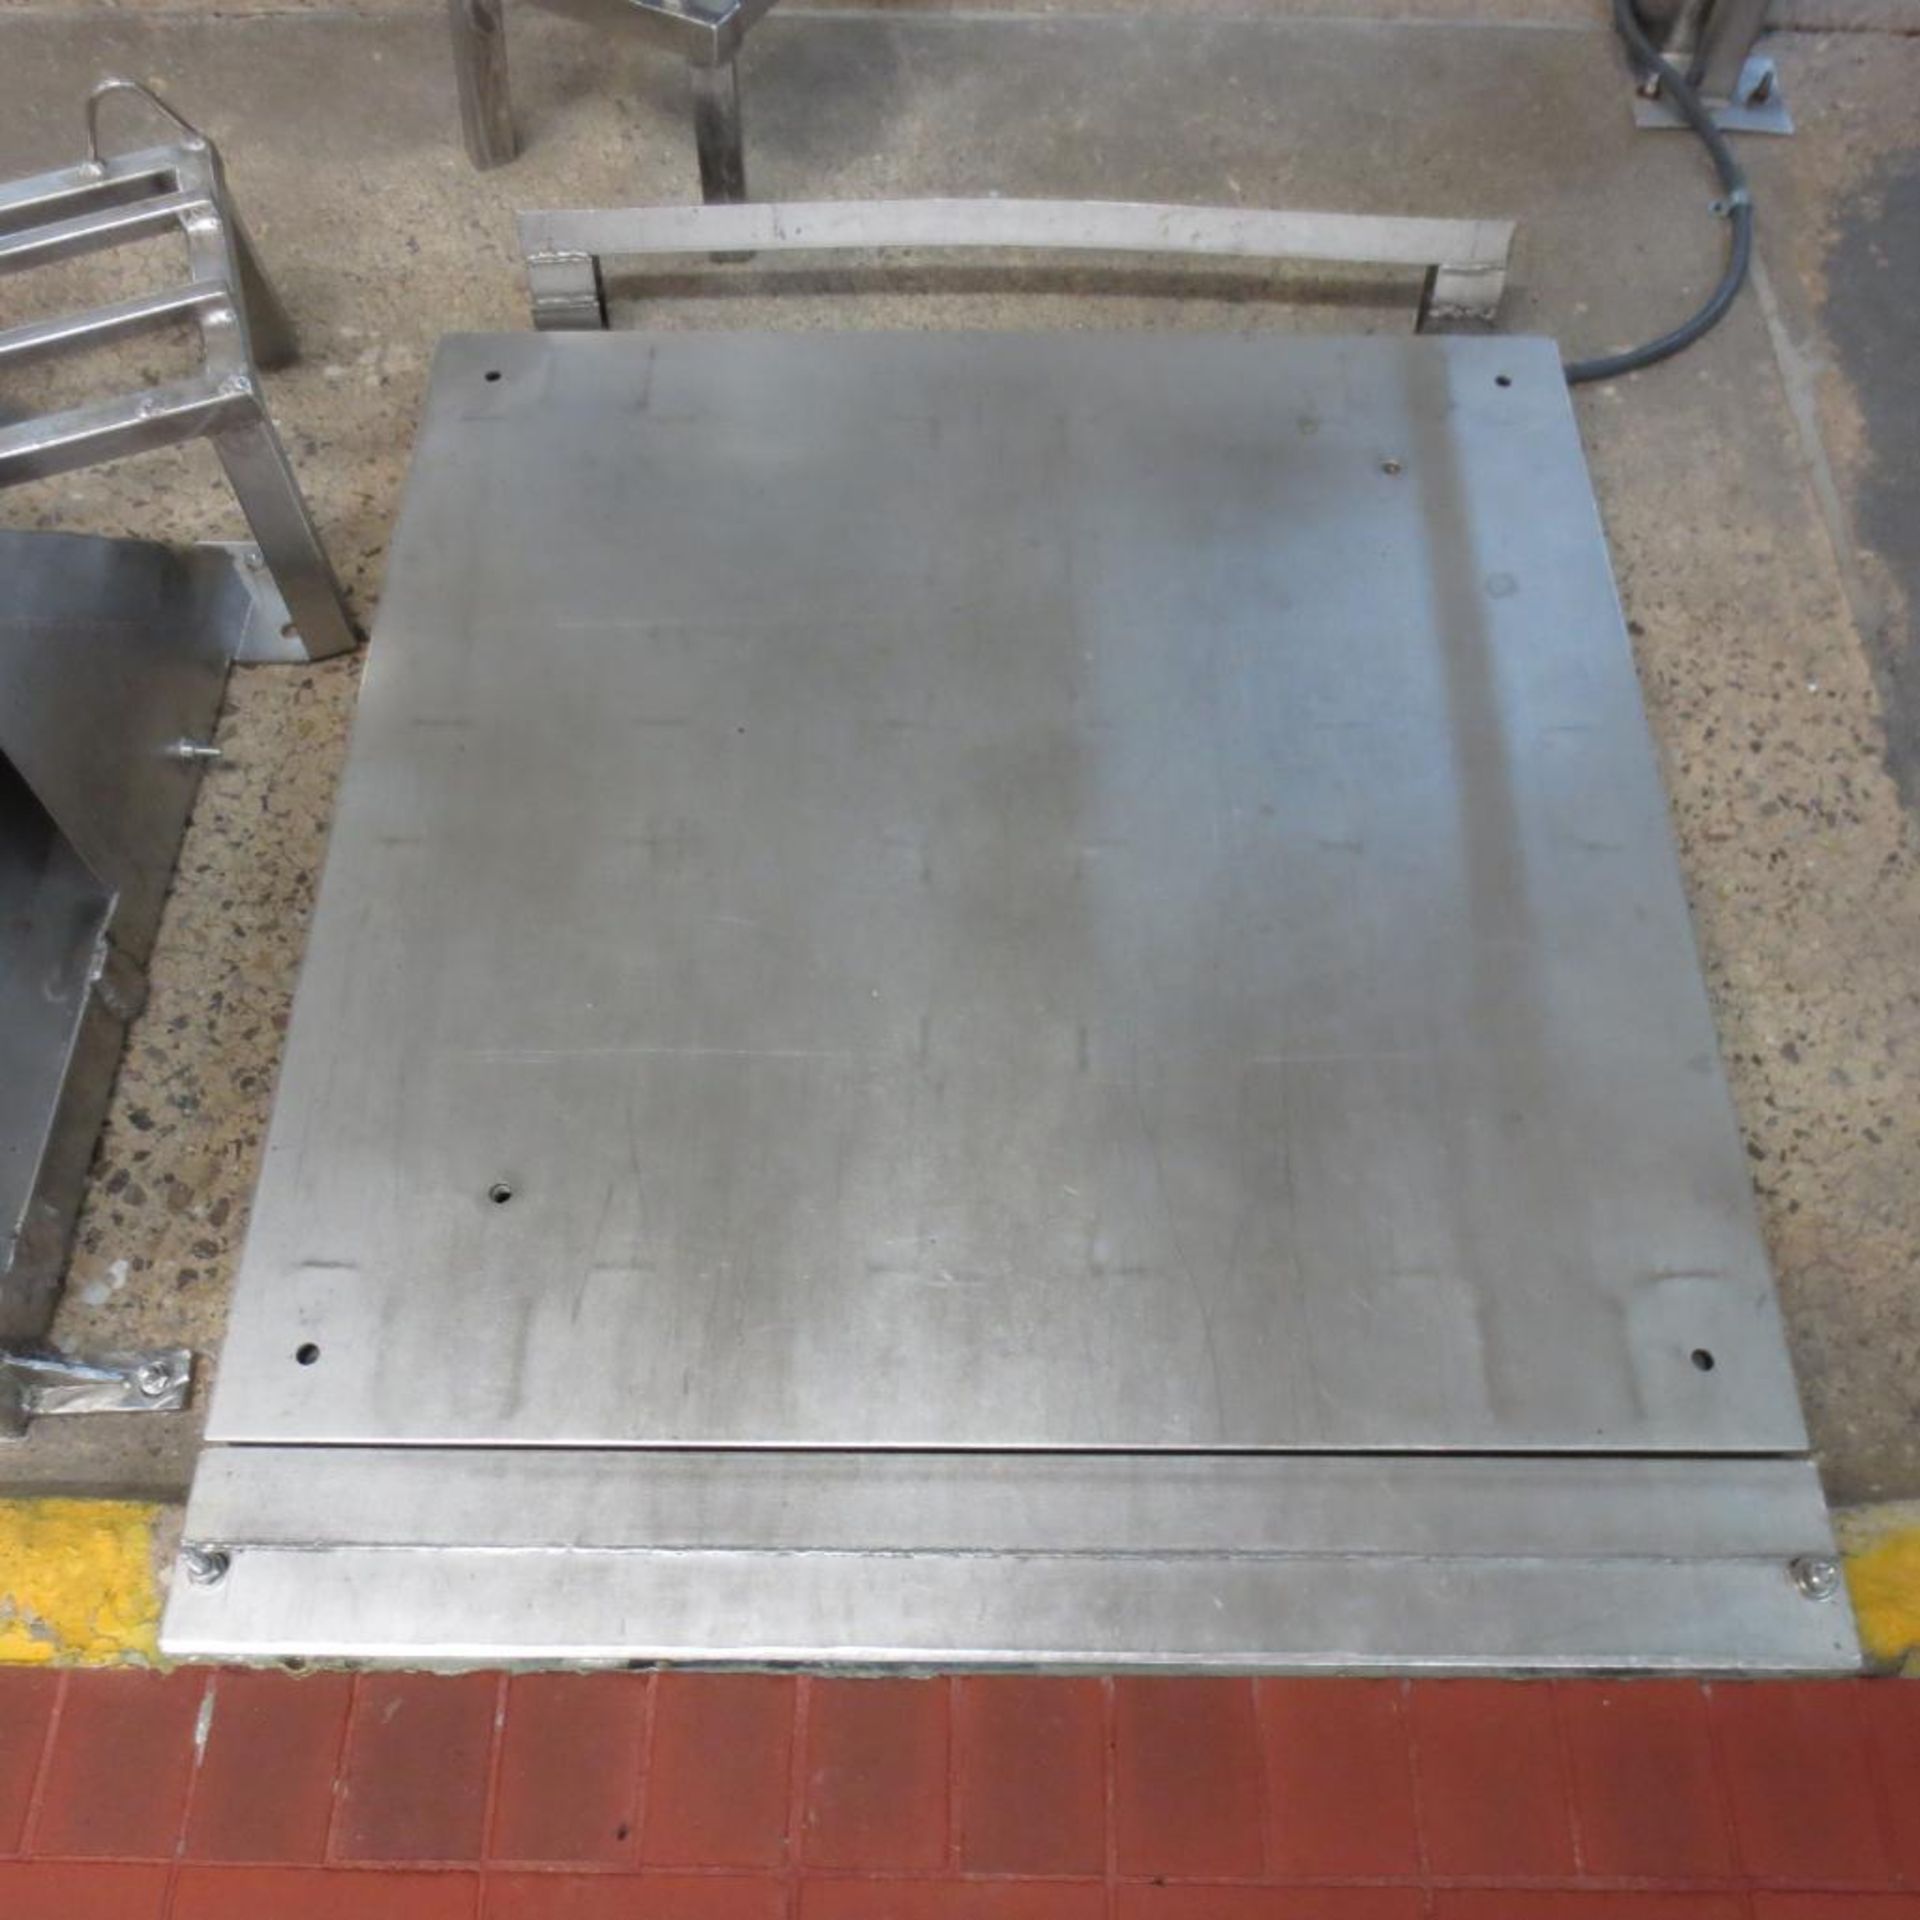 48" X 48" Stainless Platform Scale With Digital Read Out - Image 2 of 3